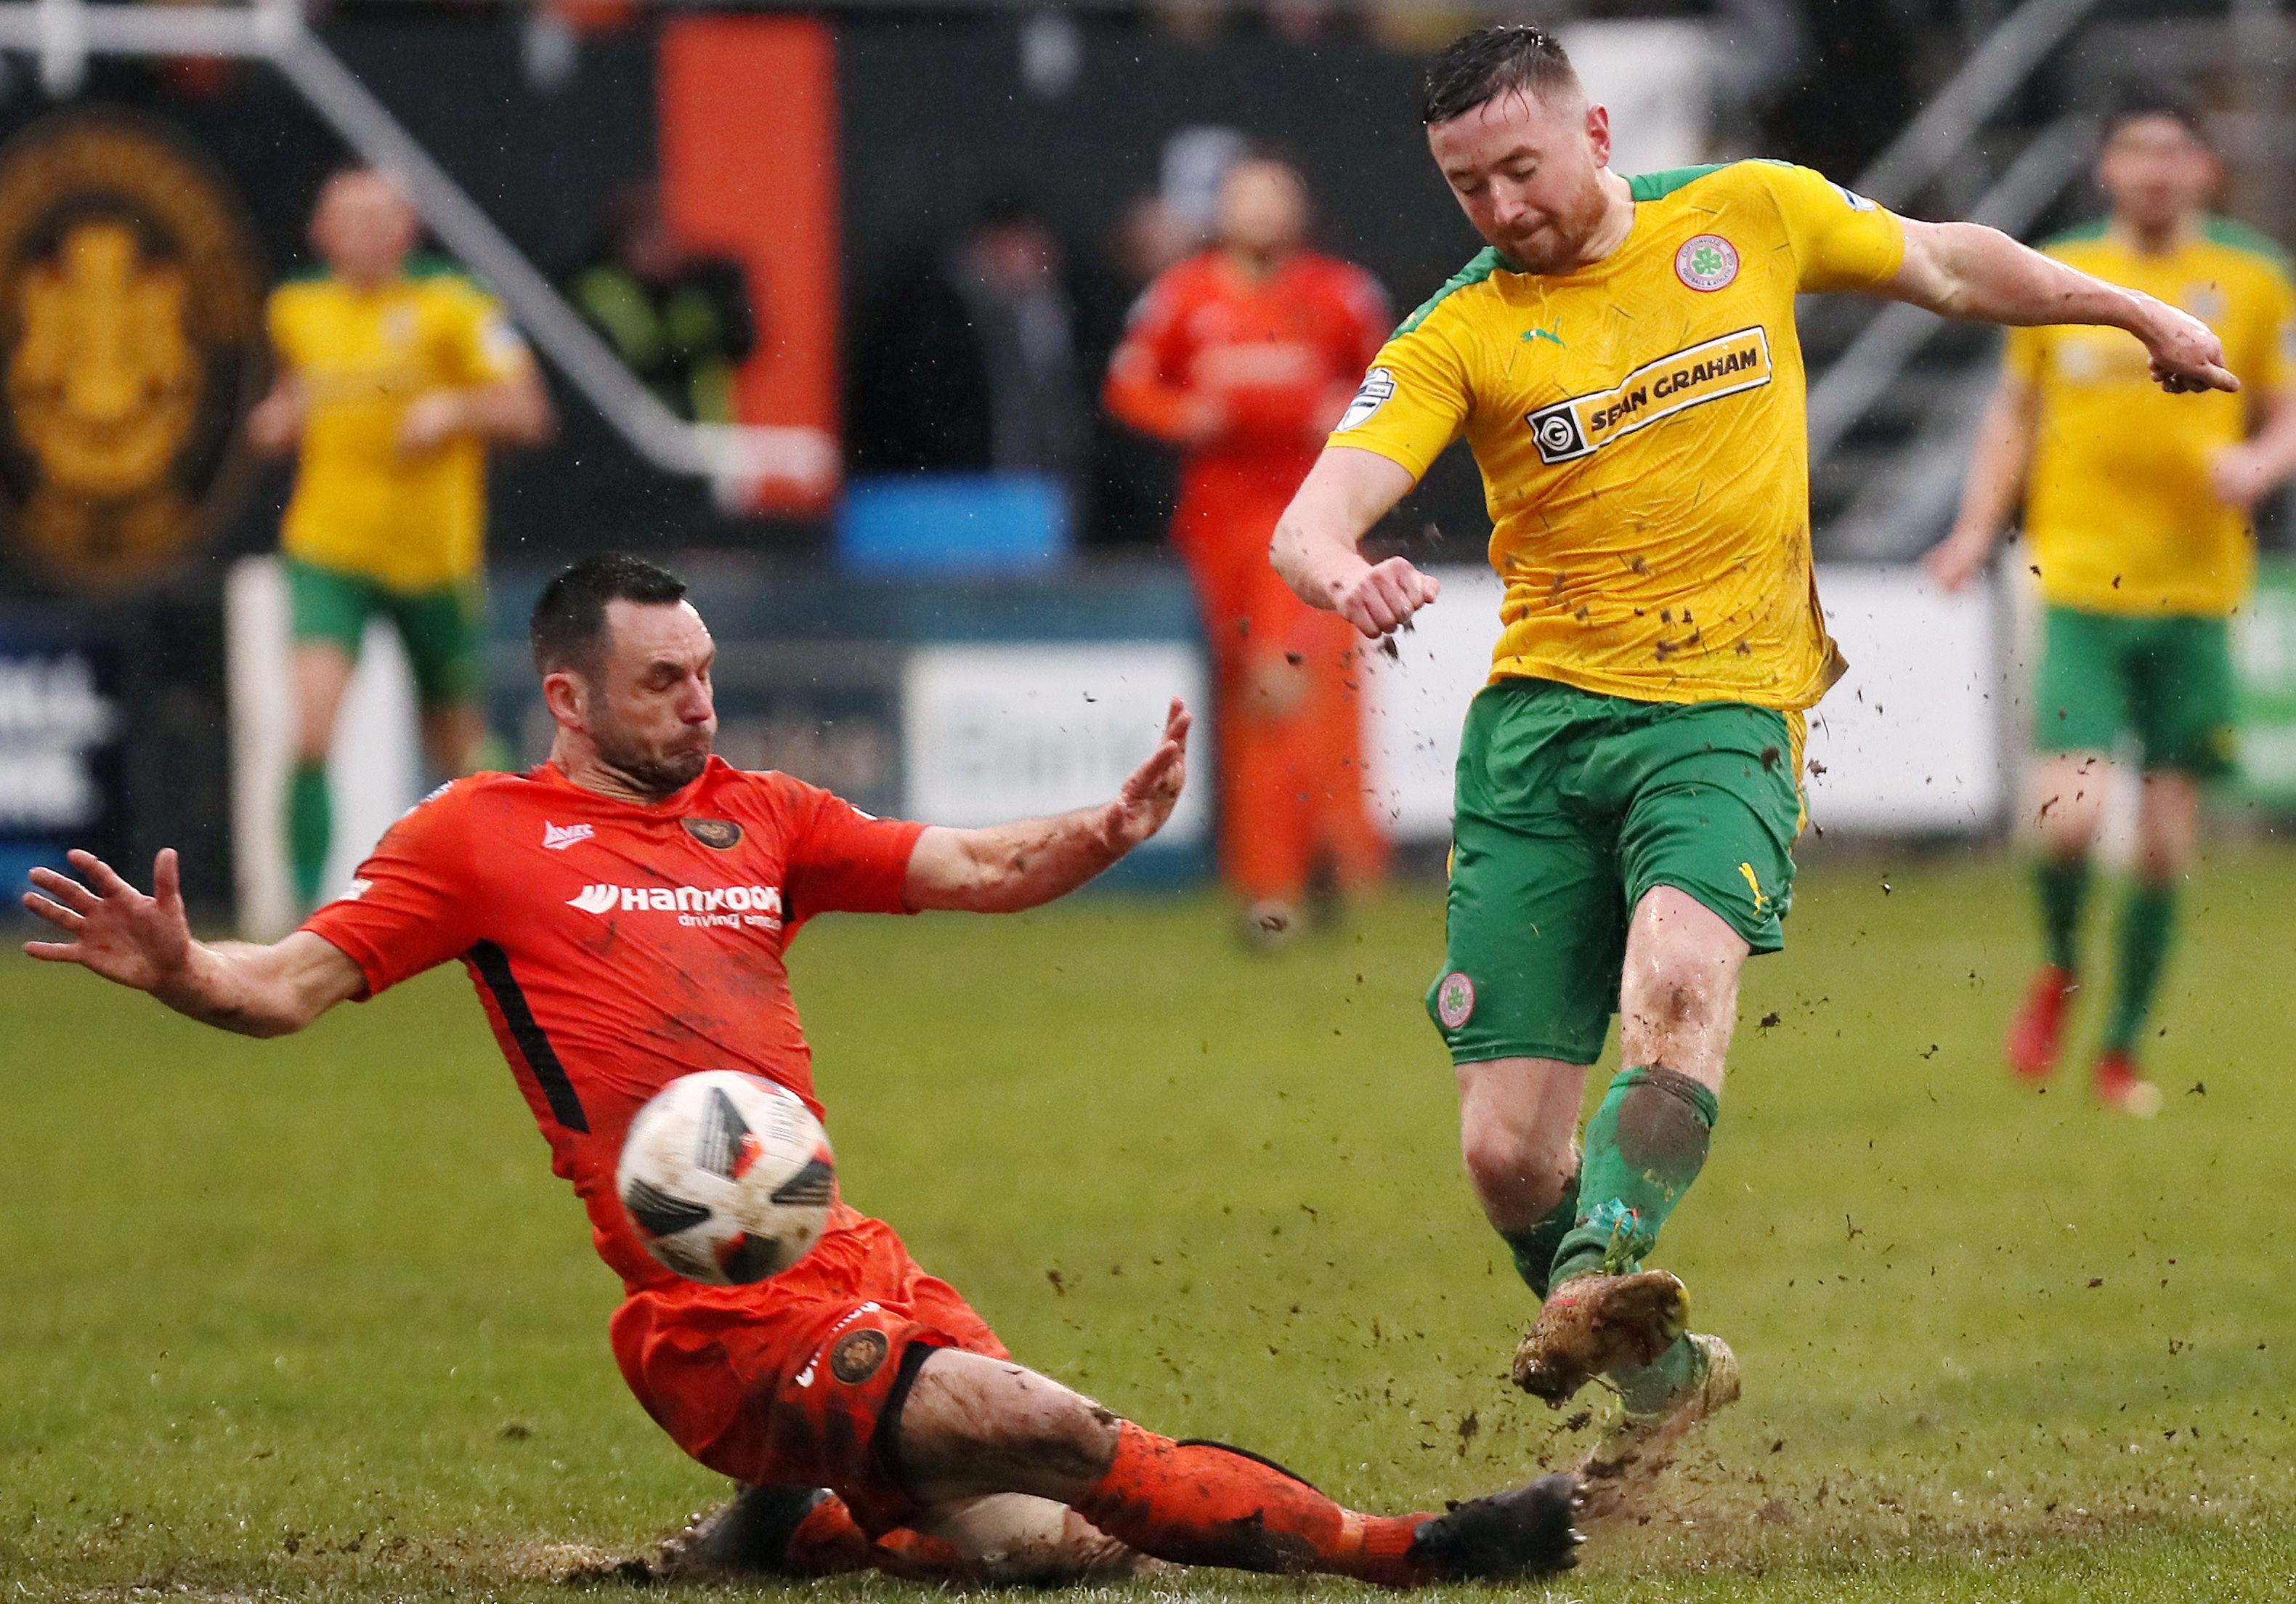 Cliftonville return to face Carrick Rangers this evening having won there in the Irish Cup at the weekend